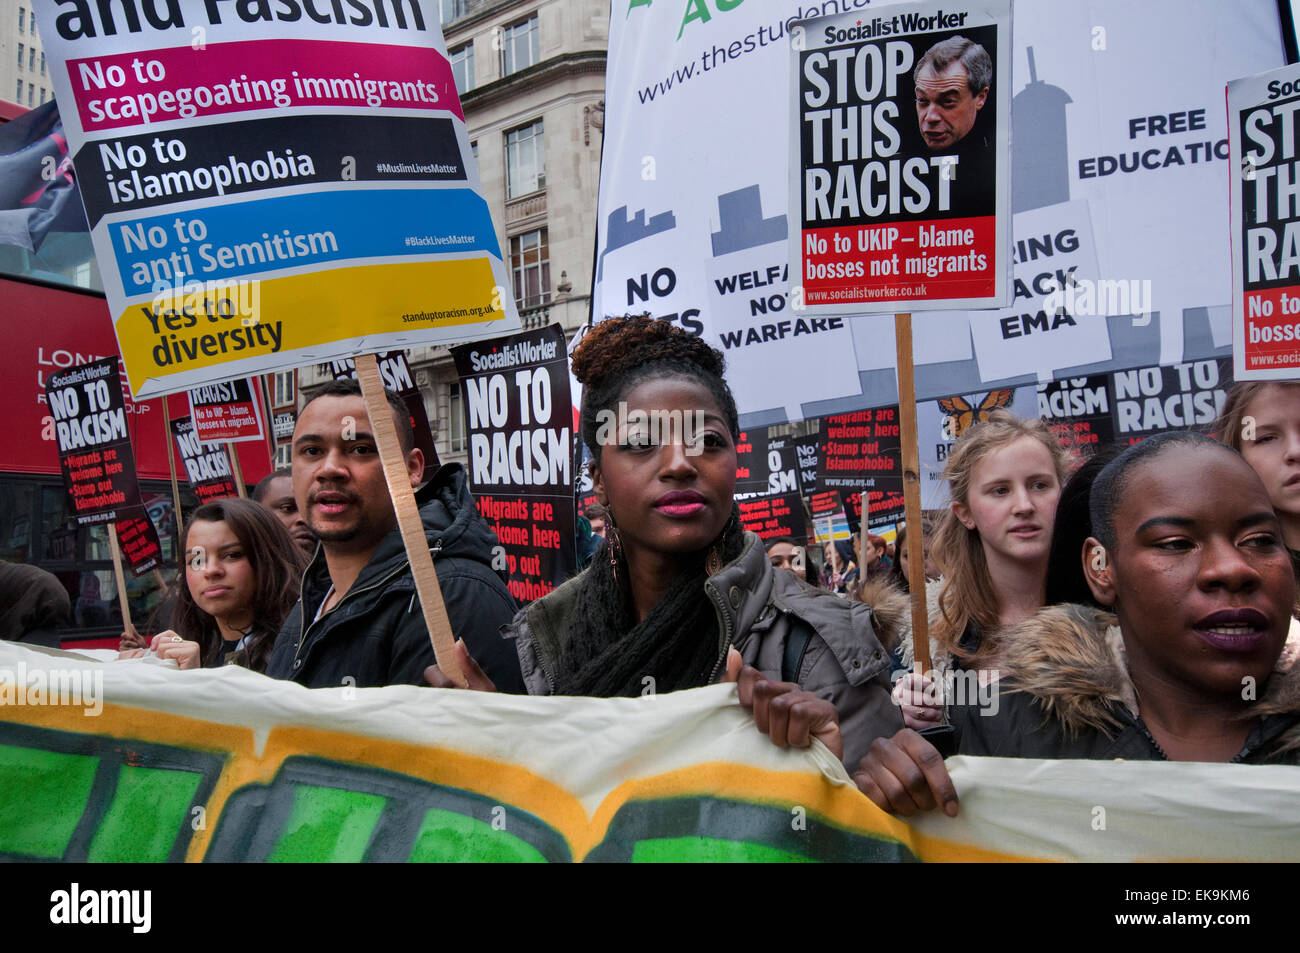 Thousands march through London on UN Anti-Racism Day protesting Racism, Fascism, Islamophobia  and anti-semitism. 21 march 2015 Stock Photo